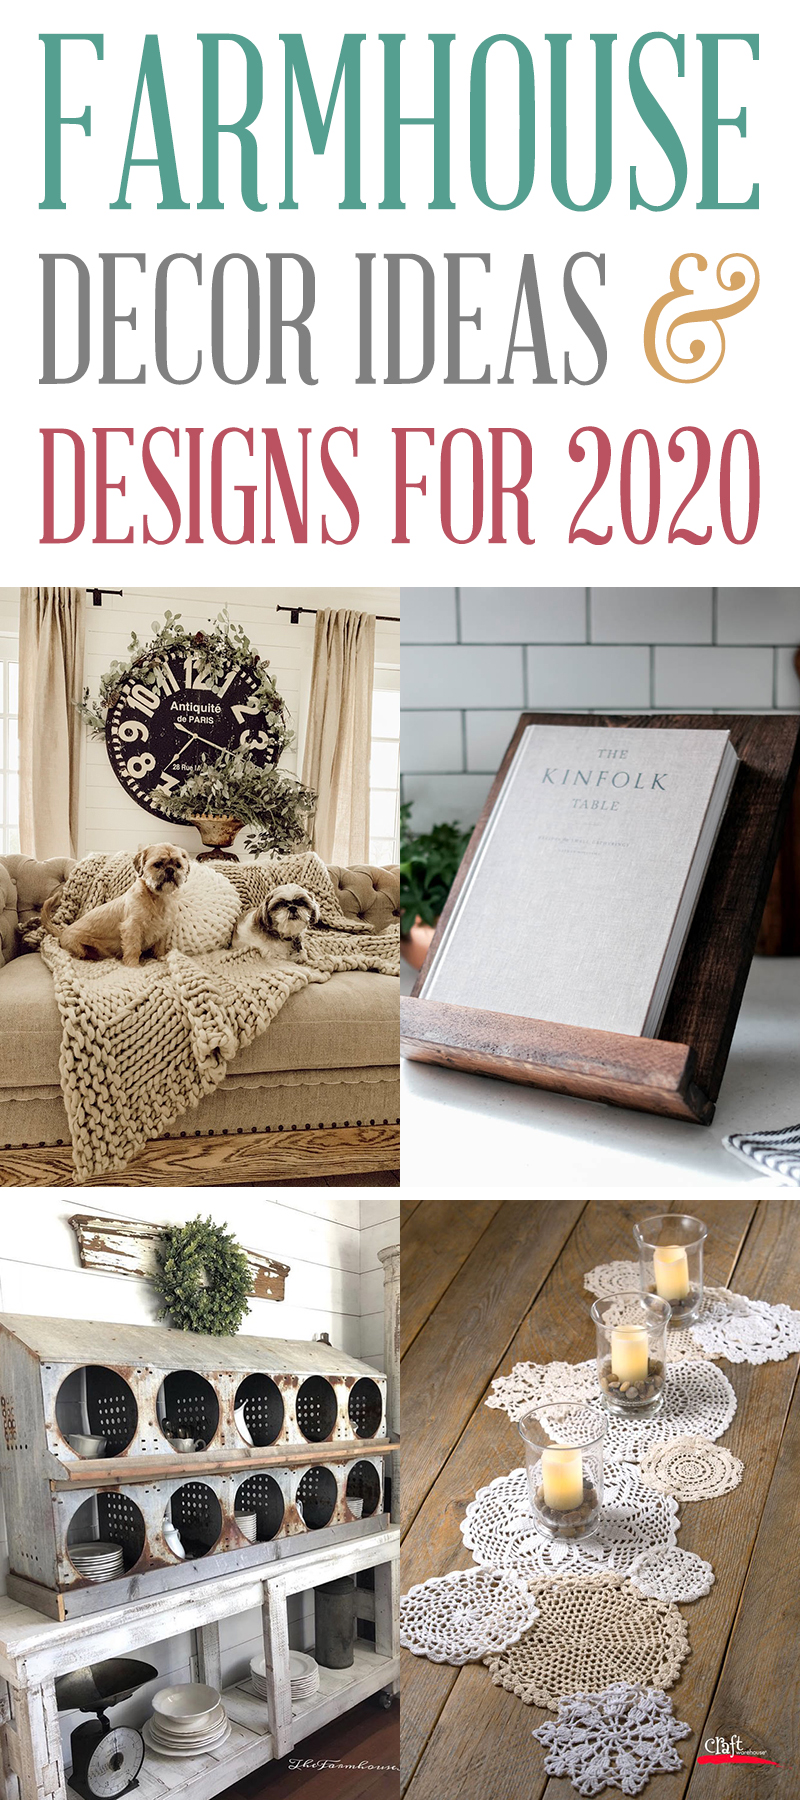 Farmhouse Decor Ideas And Designs For 2020 The Cottage Market